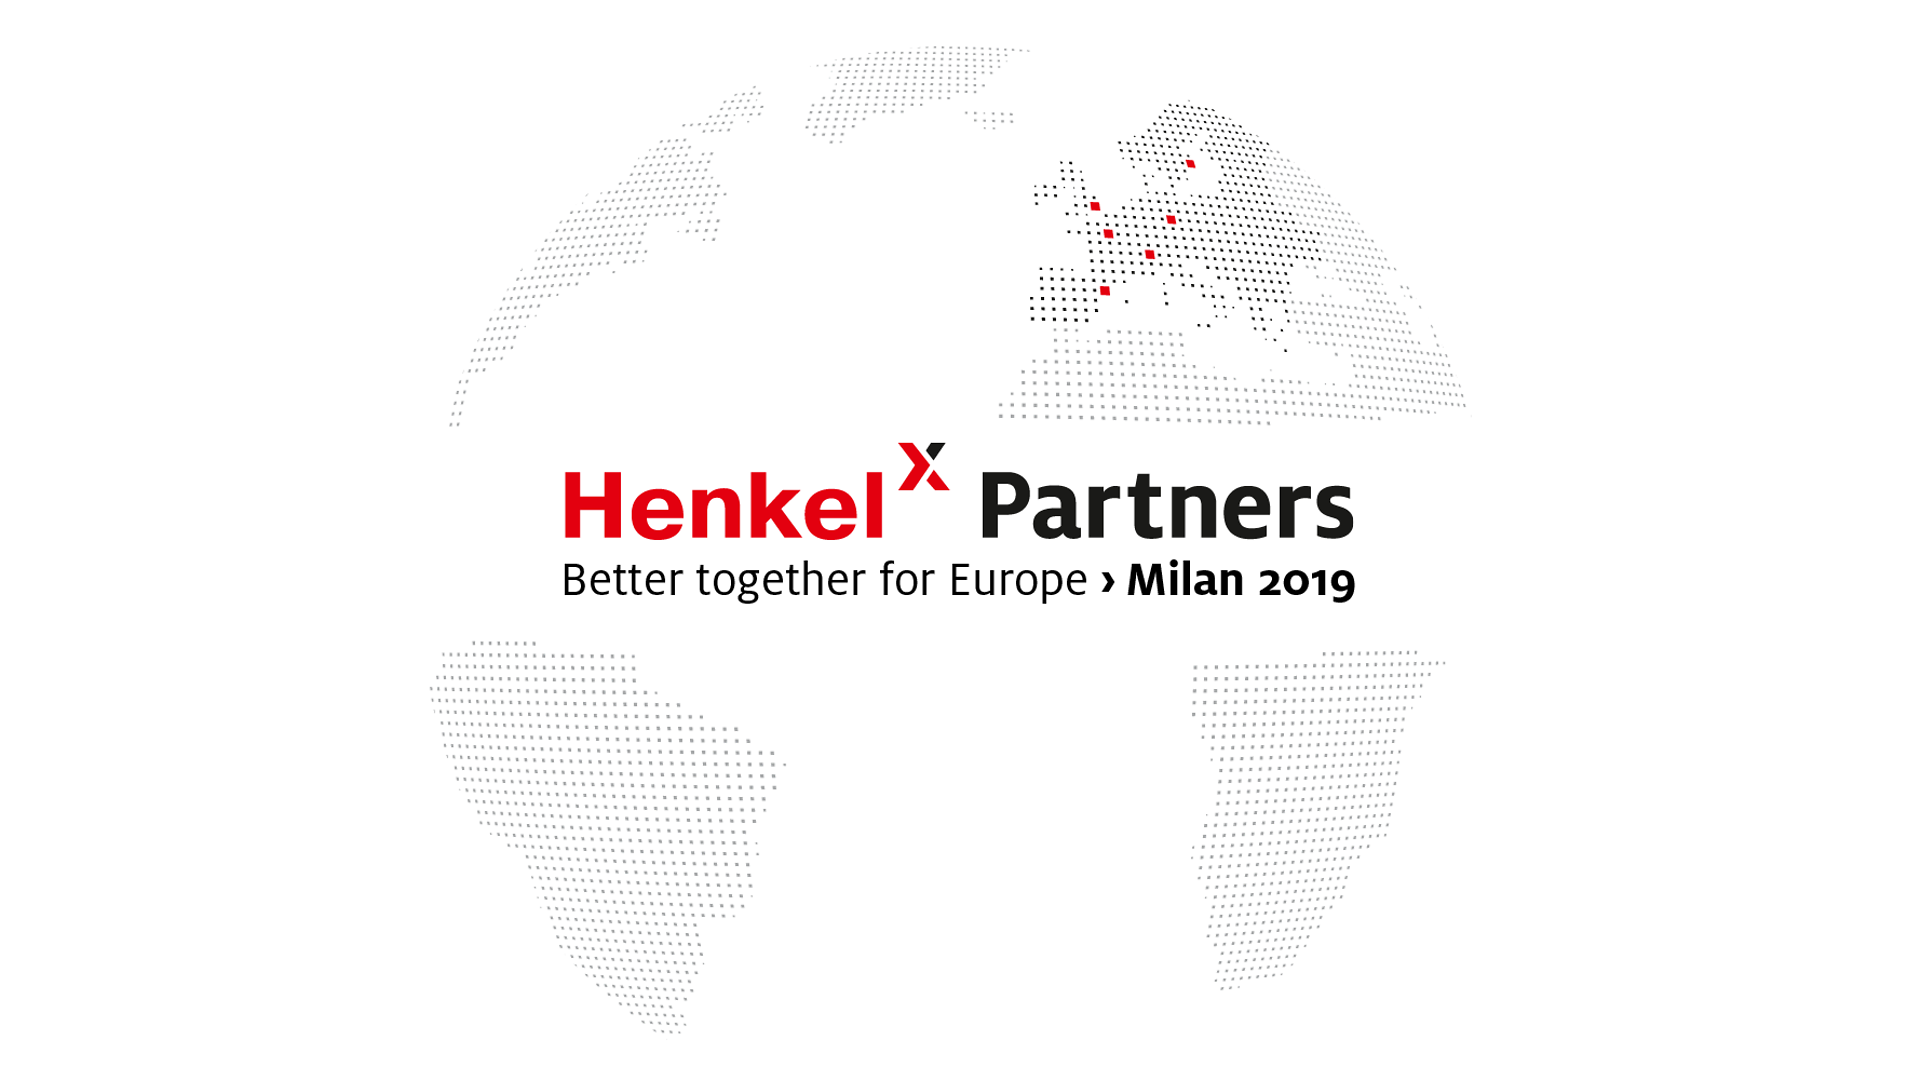 Henkel X Partners motto “Better together for Europe”